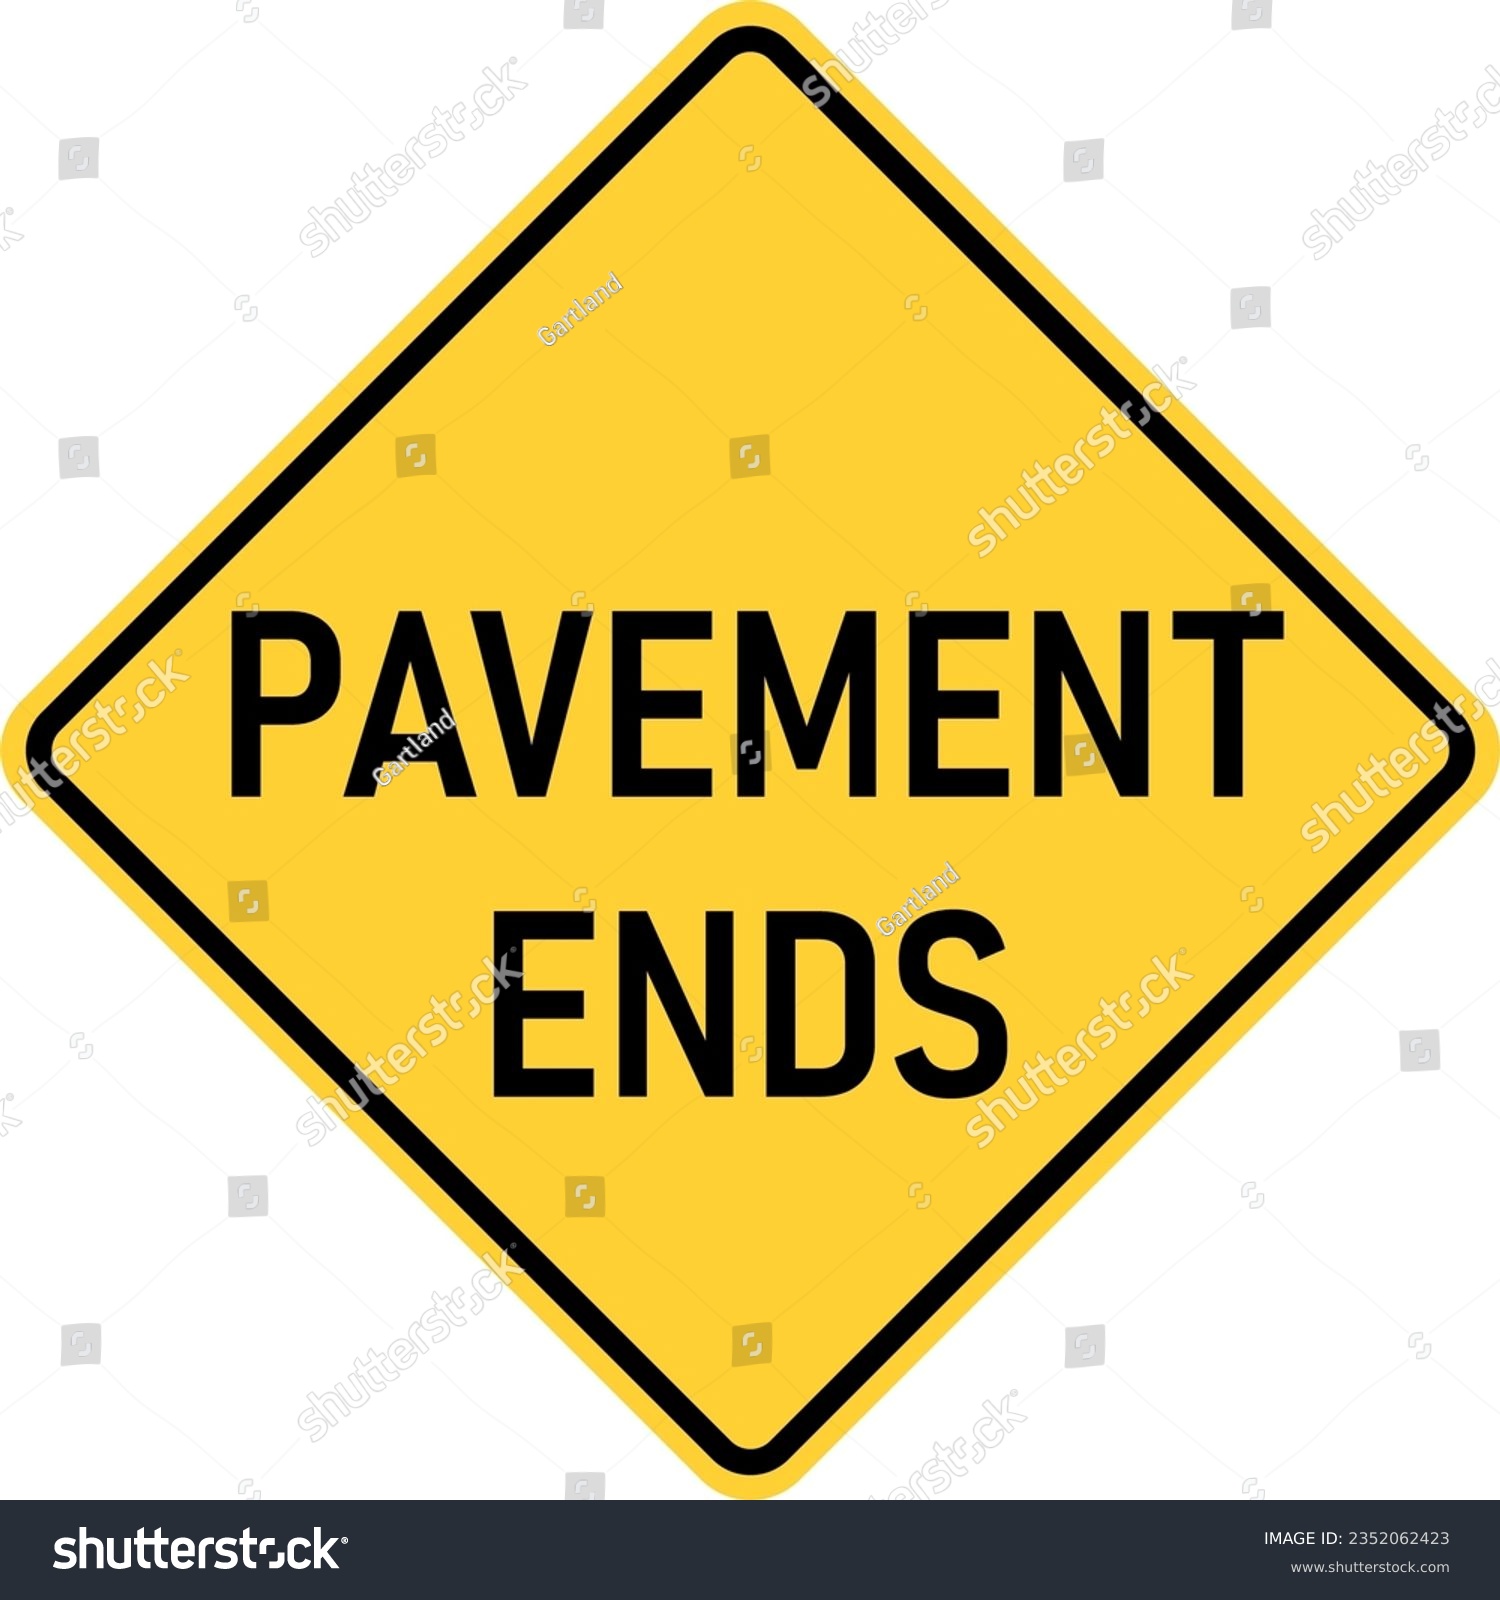 SVG of Vector graphic of a usa pavement ends highway sign. It consists of black lettering saying Pavement Ends within a black and yellow square tilted to 45 degrees svg